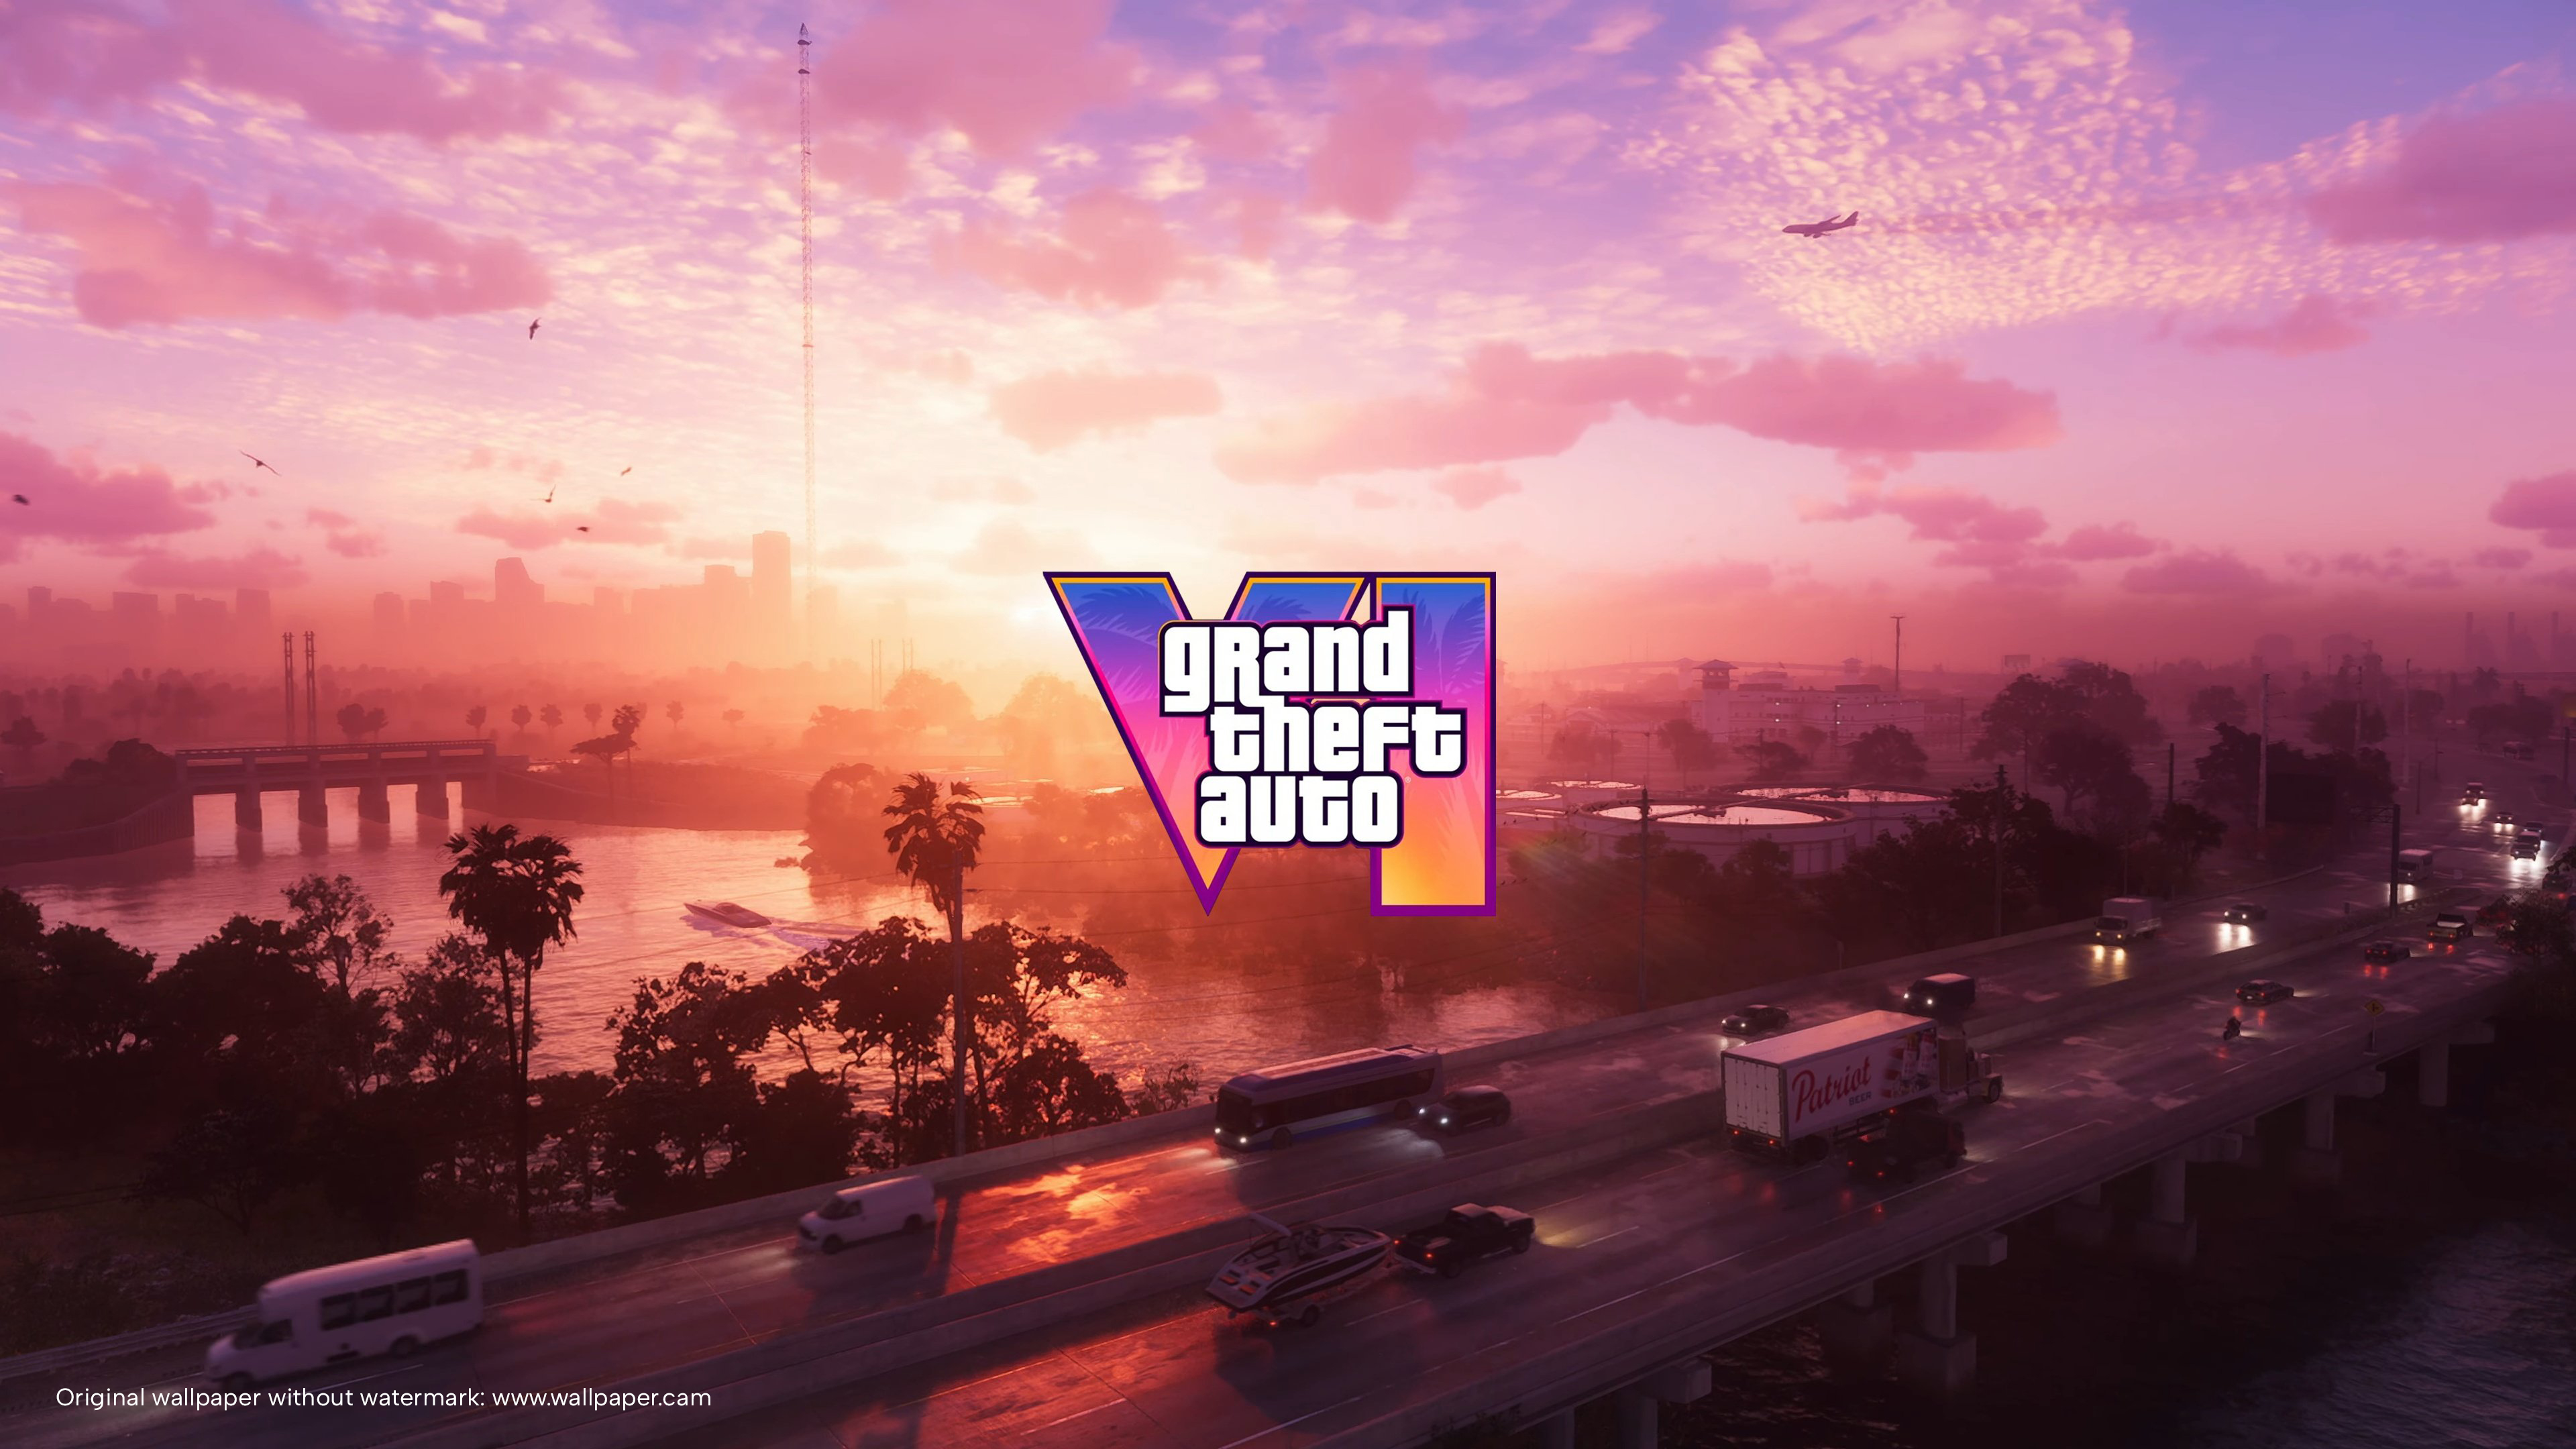 General 3840x2160 Grand Theft Auto VI Games posters sunset sunset glow illustration sunlight Rockstar Games clouds birds traffic watermarked video games video game art screen shot sky Grand Theft Auto headlights taillights road water bridge palm trees vehicle driving airplane